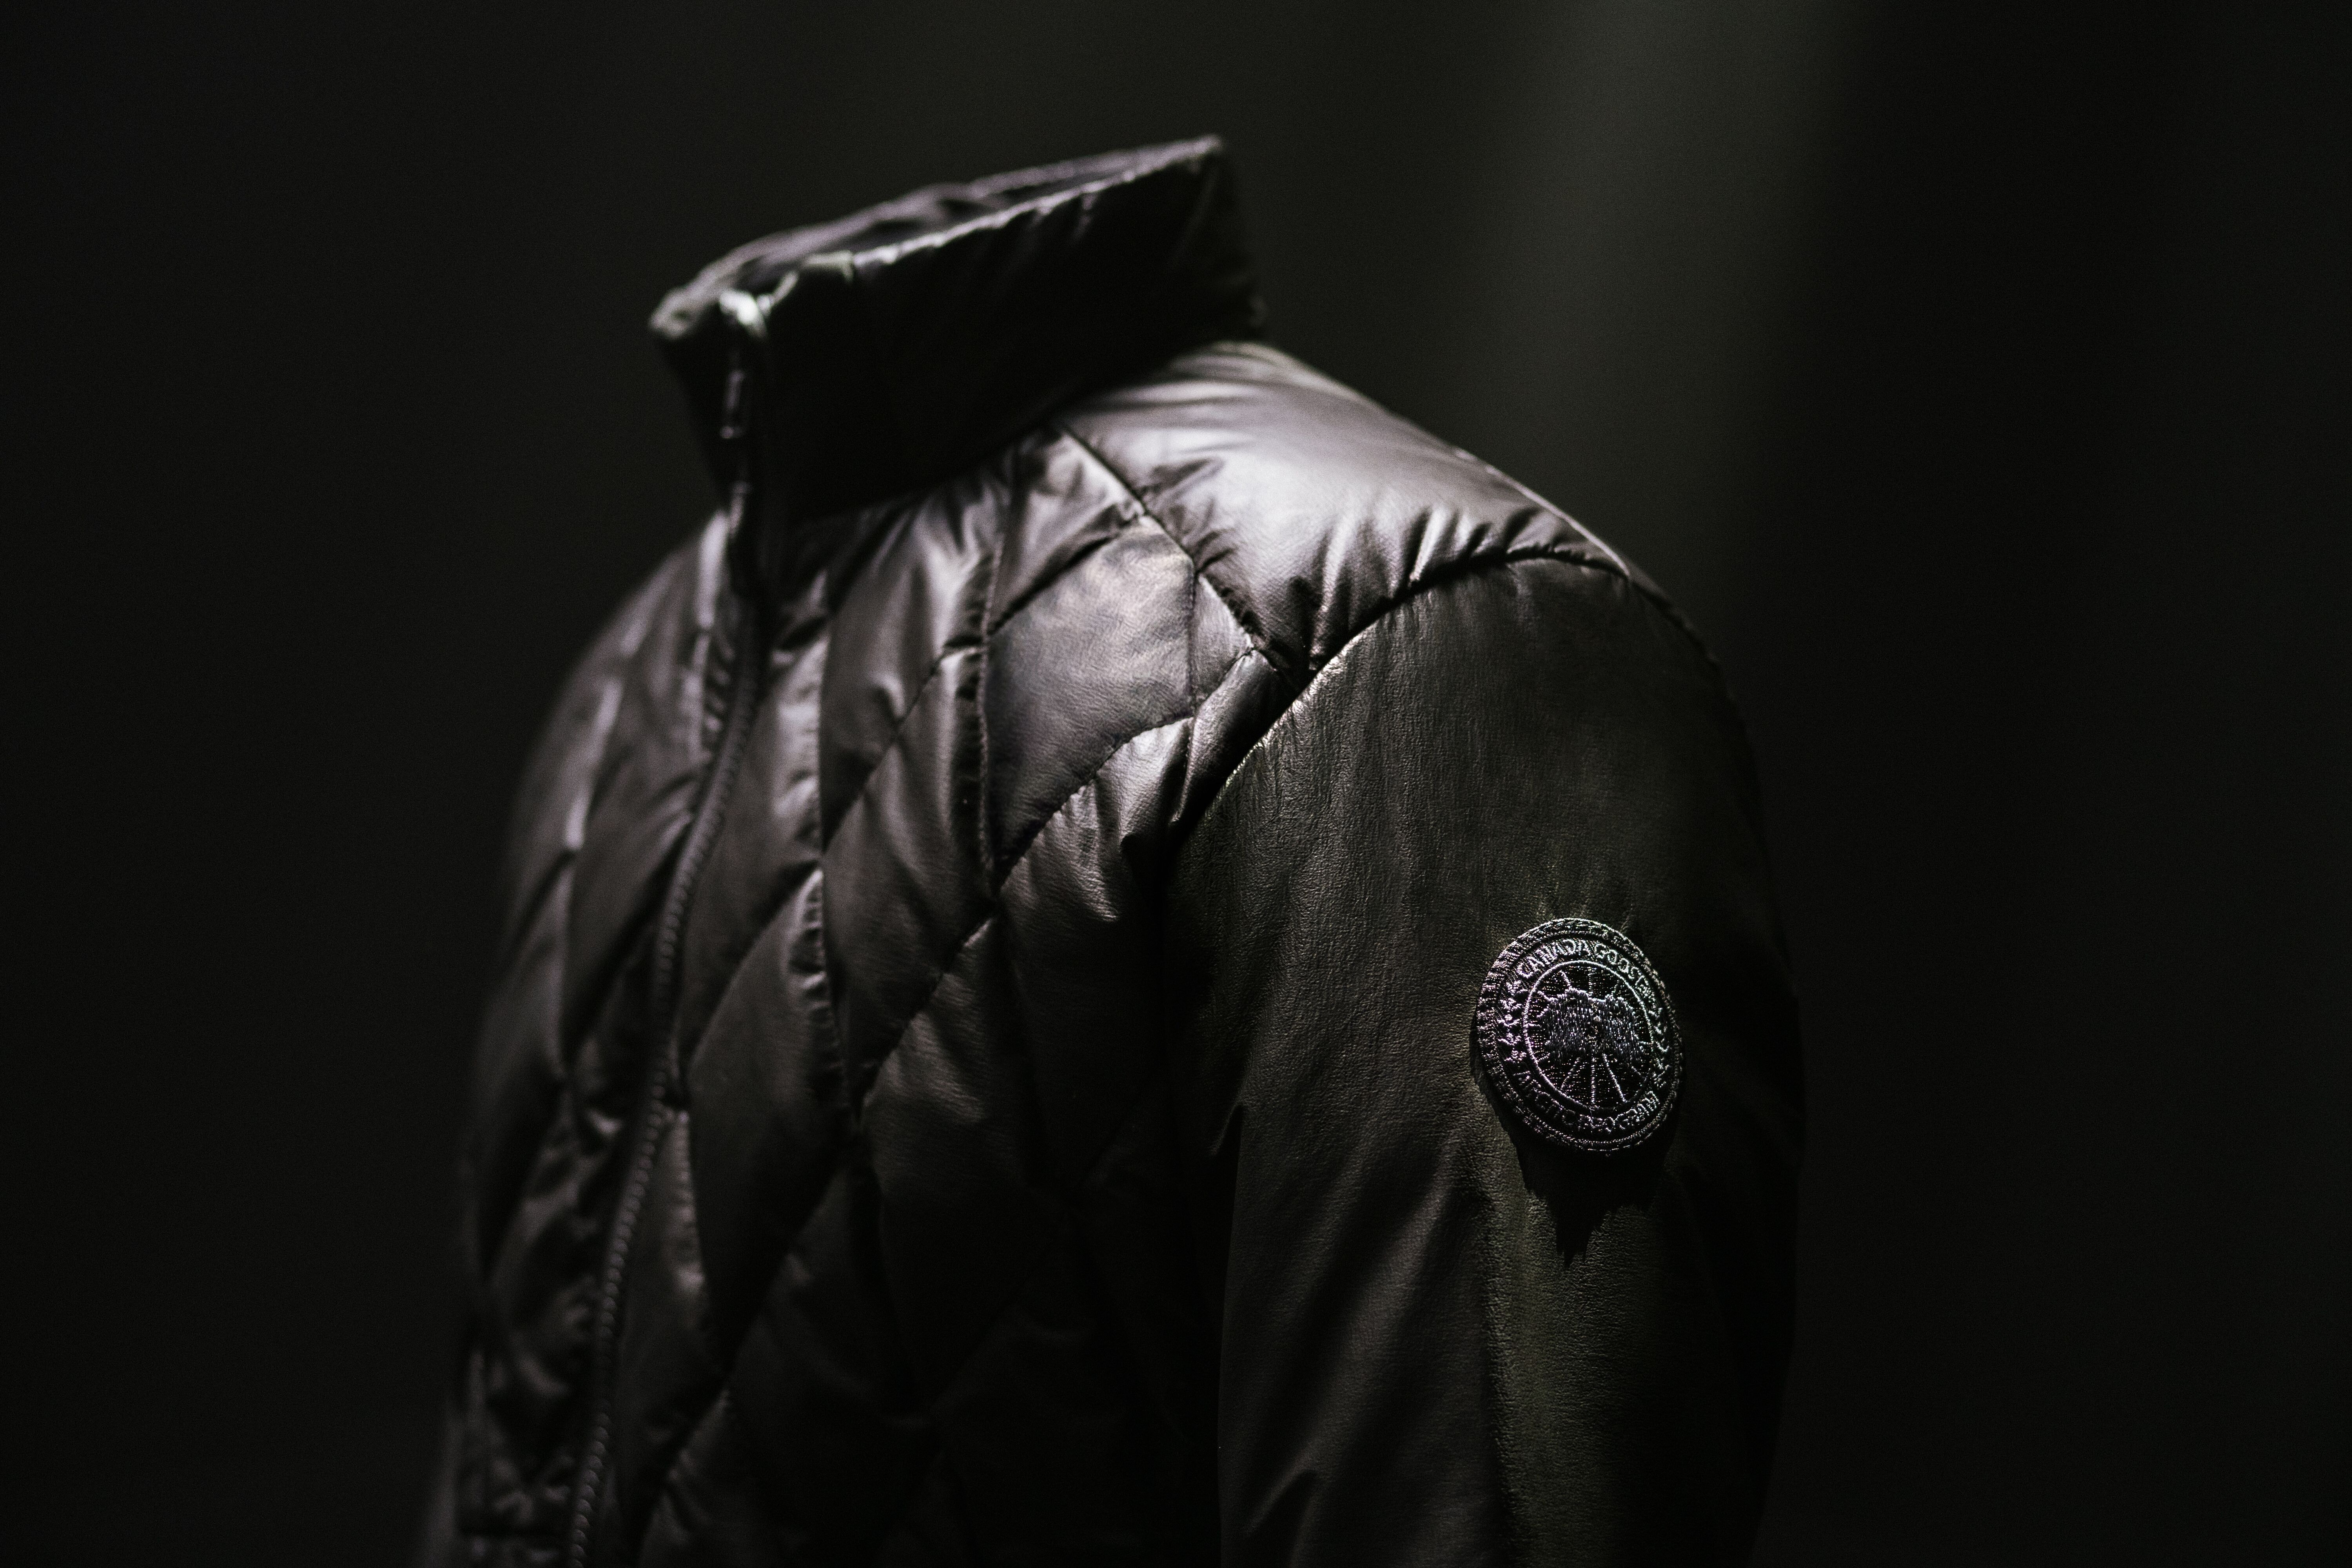 canada goose gore tex nomad jacket buy cost price outerwear men women clothing clothes fashion hybridge lyte capsule collection collab collaboration spring summer 2019 ss19 coat